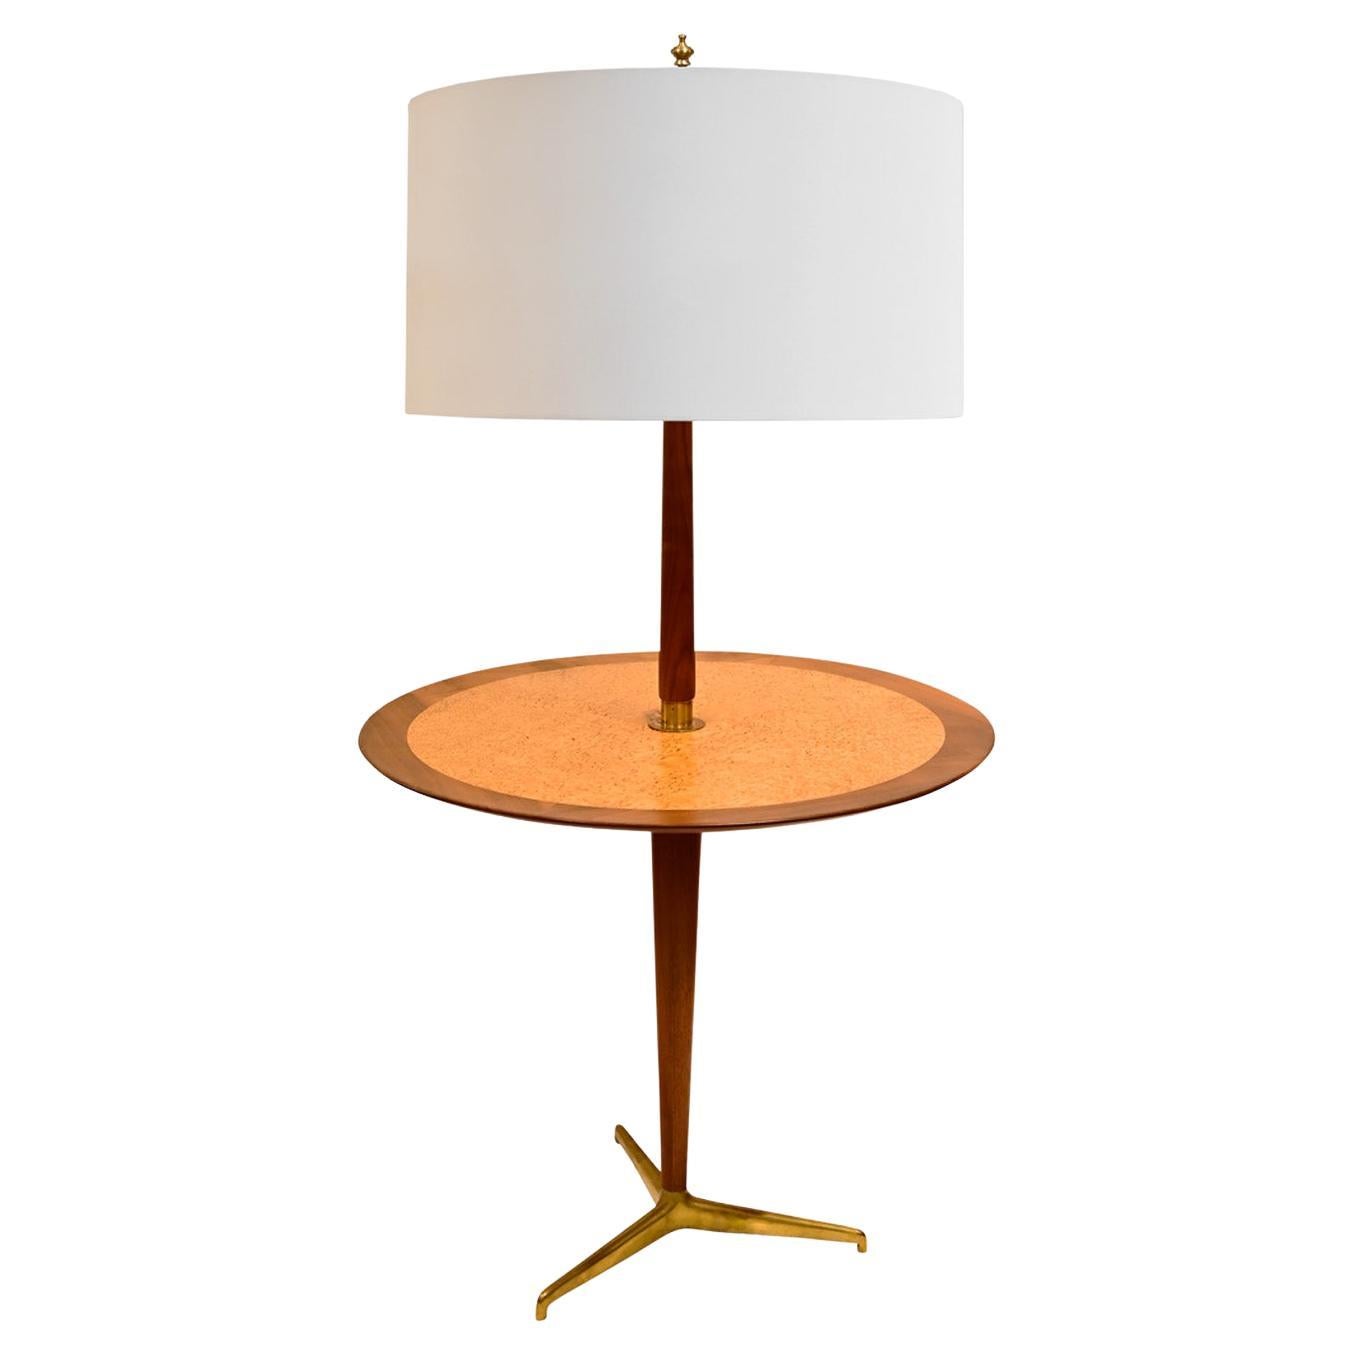 Edward Wormley for Dunbar Floor Lamp with Incorporated Table 1954 (Signed) For Sale